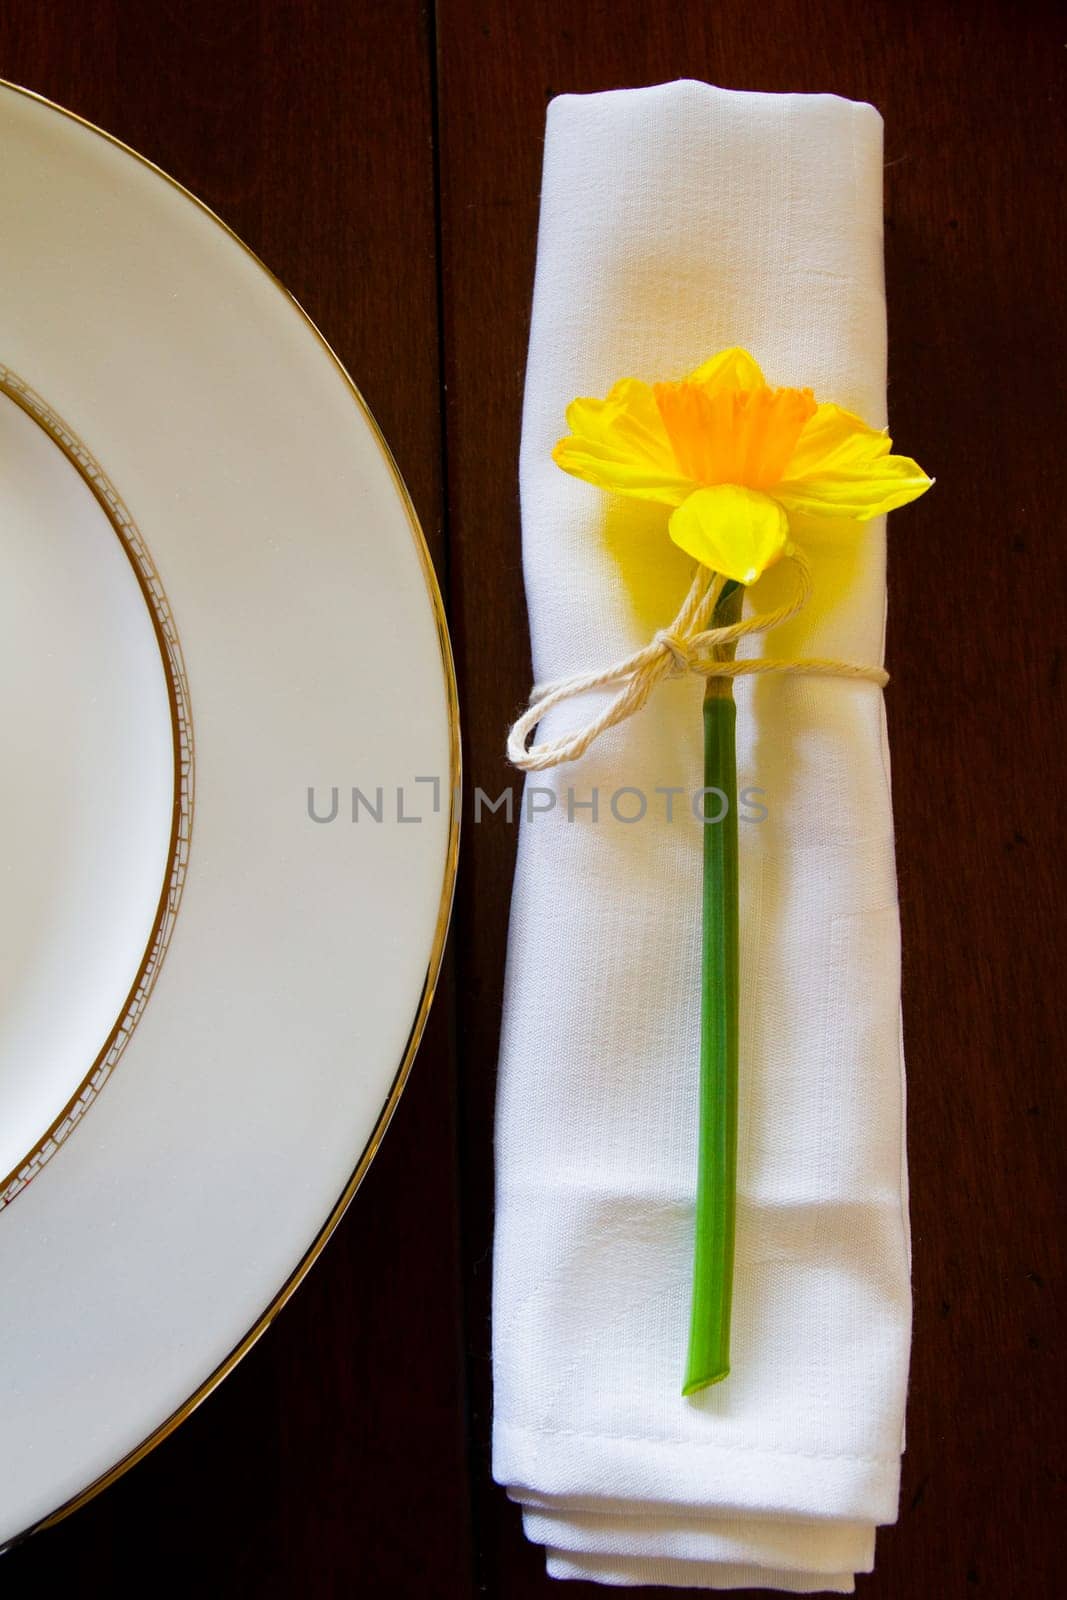 Elegant table setting with a folded linen napkin tied with twine and a yellow daffodil, resting on a golden-rimmed dinner plate. Perfect for upscale events and fine dining. Fort Wayne, Indiana.